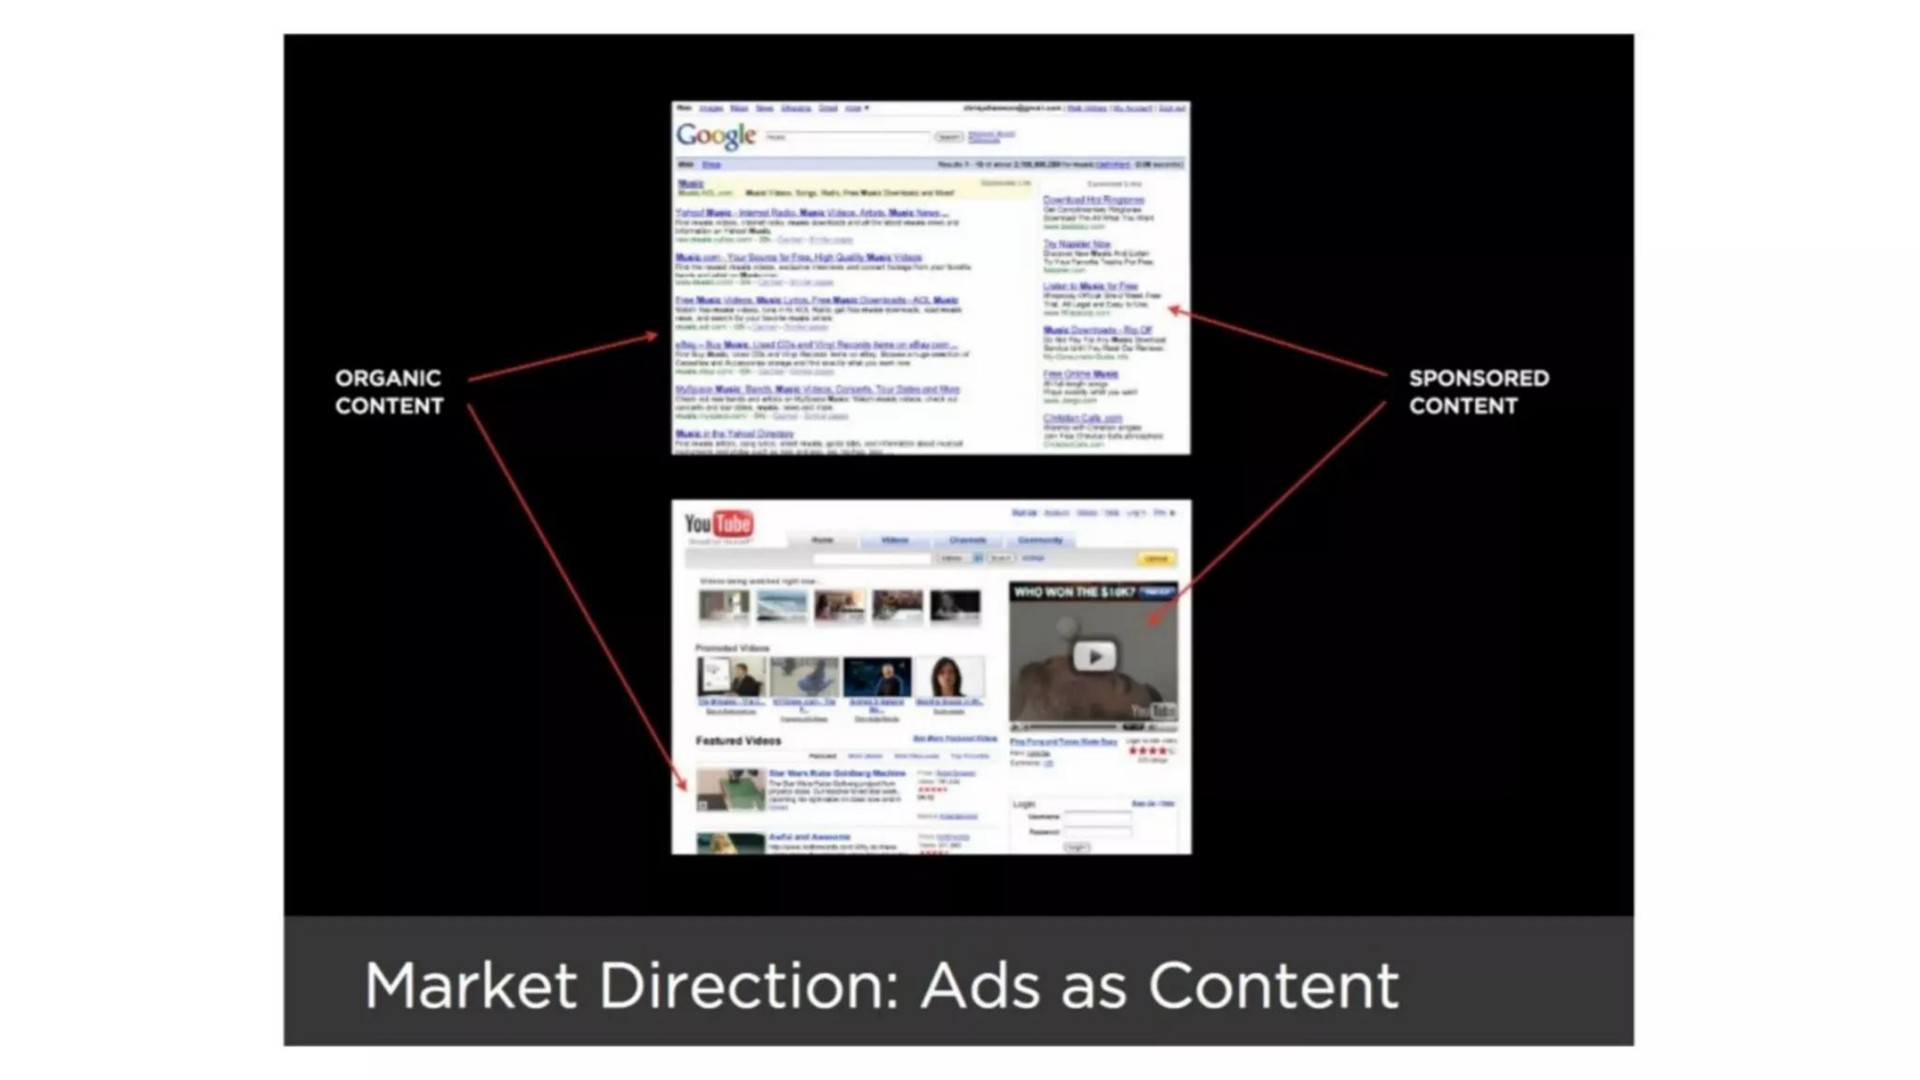 ted content sorter sponsored content market direction ads as content | BuzzFeed